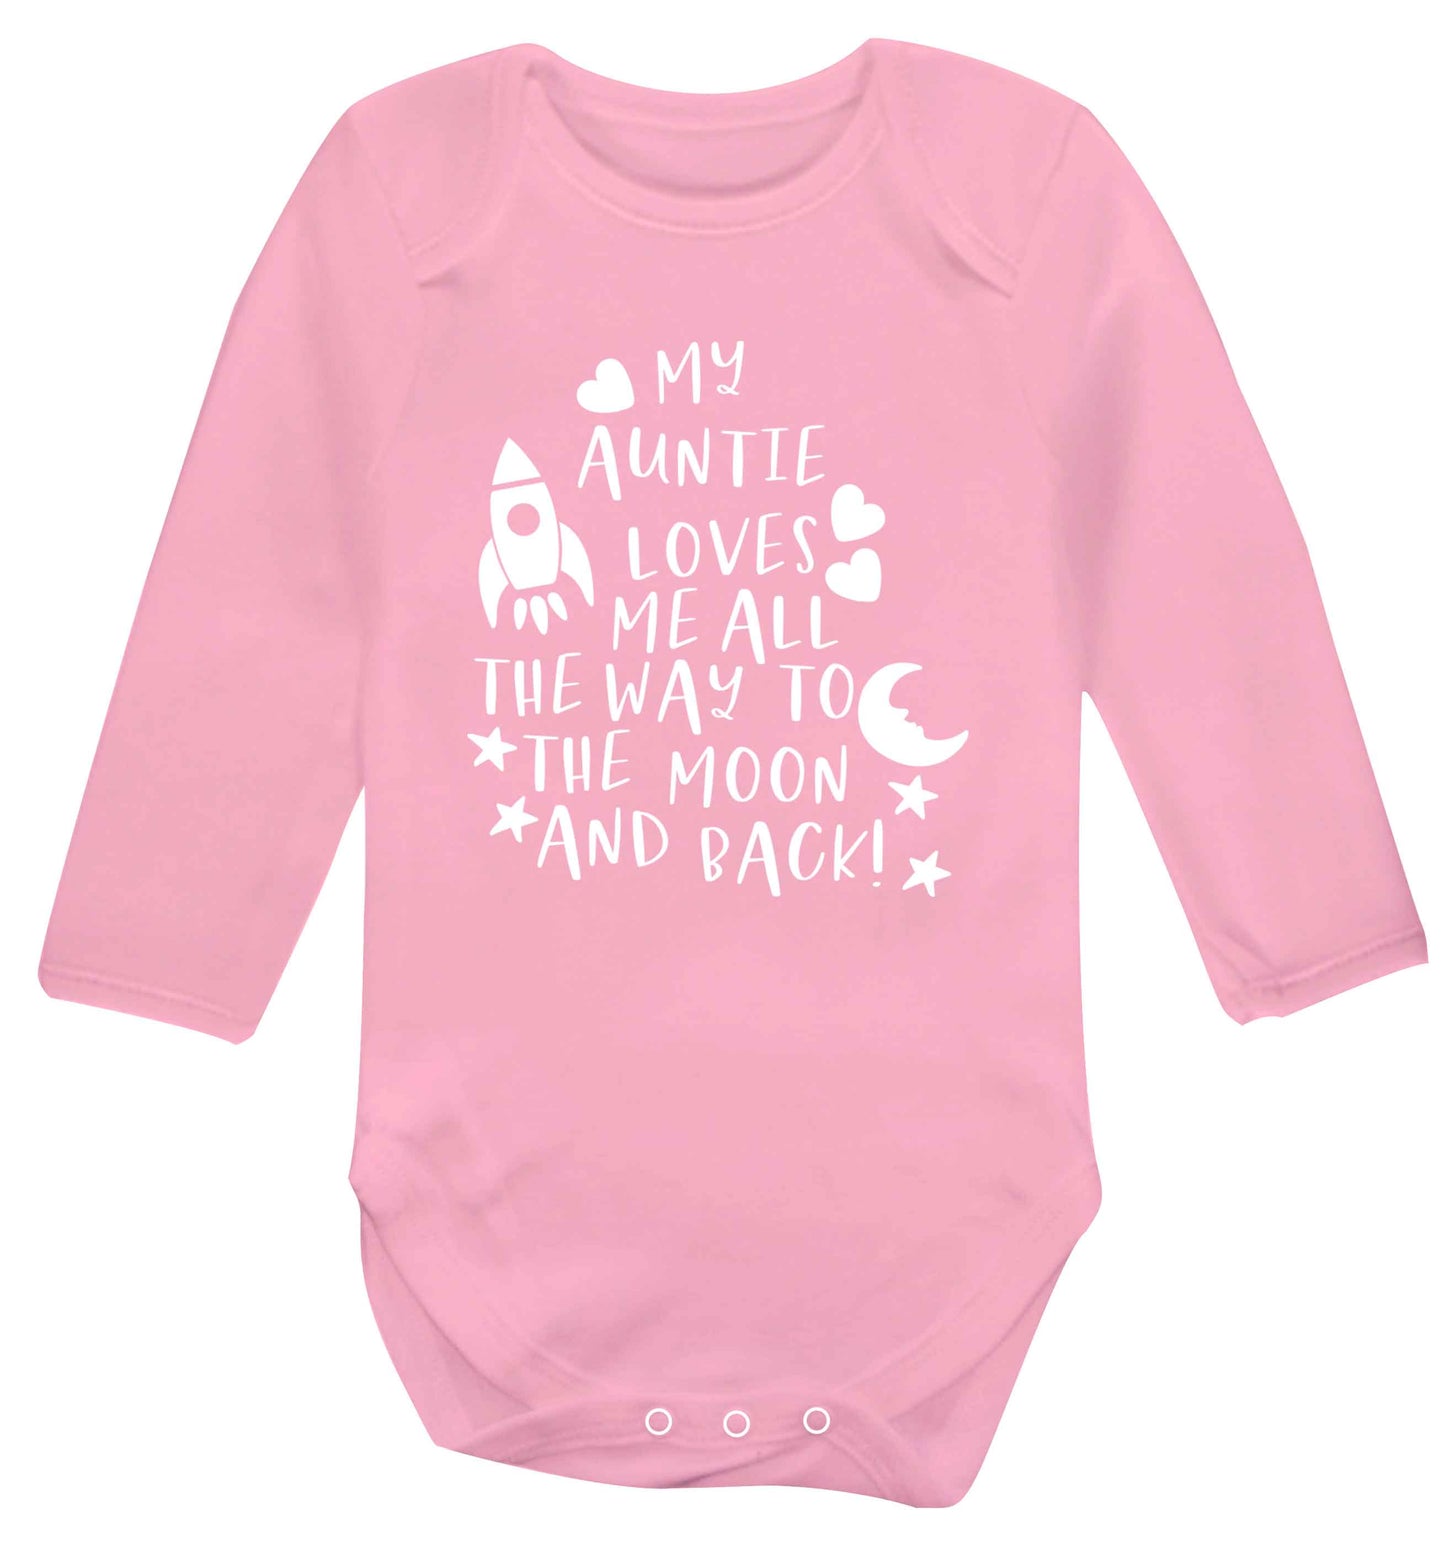 My auntie loves me all the way to the moon and back Baby Vest long sleeved pale pink 6-12 months